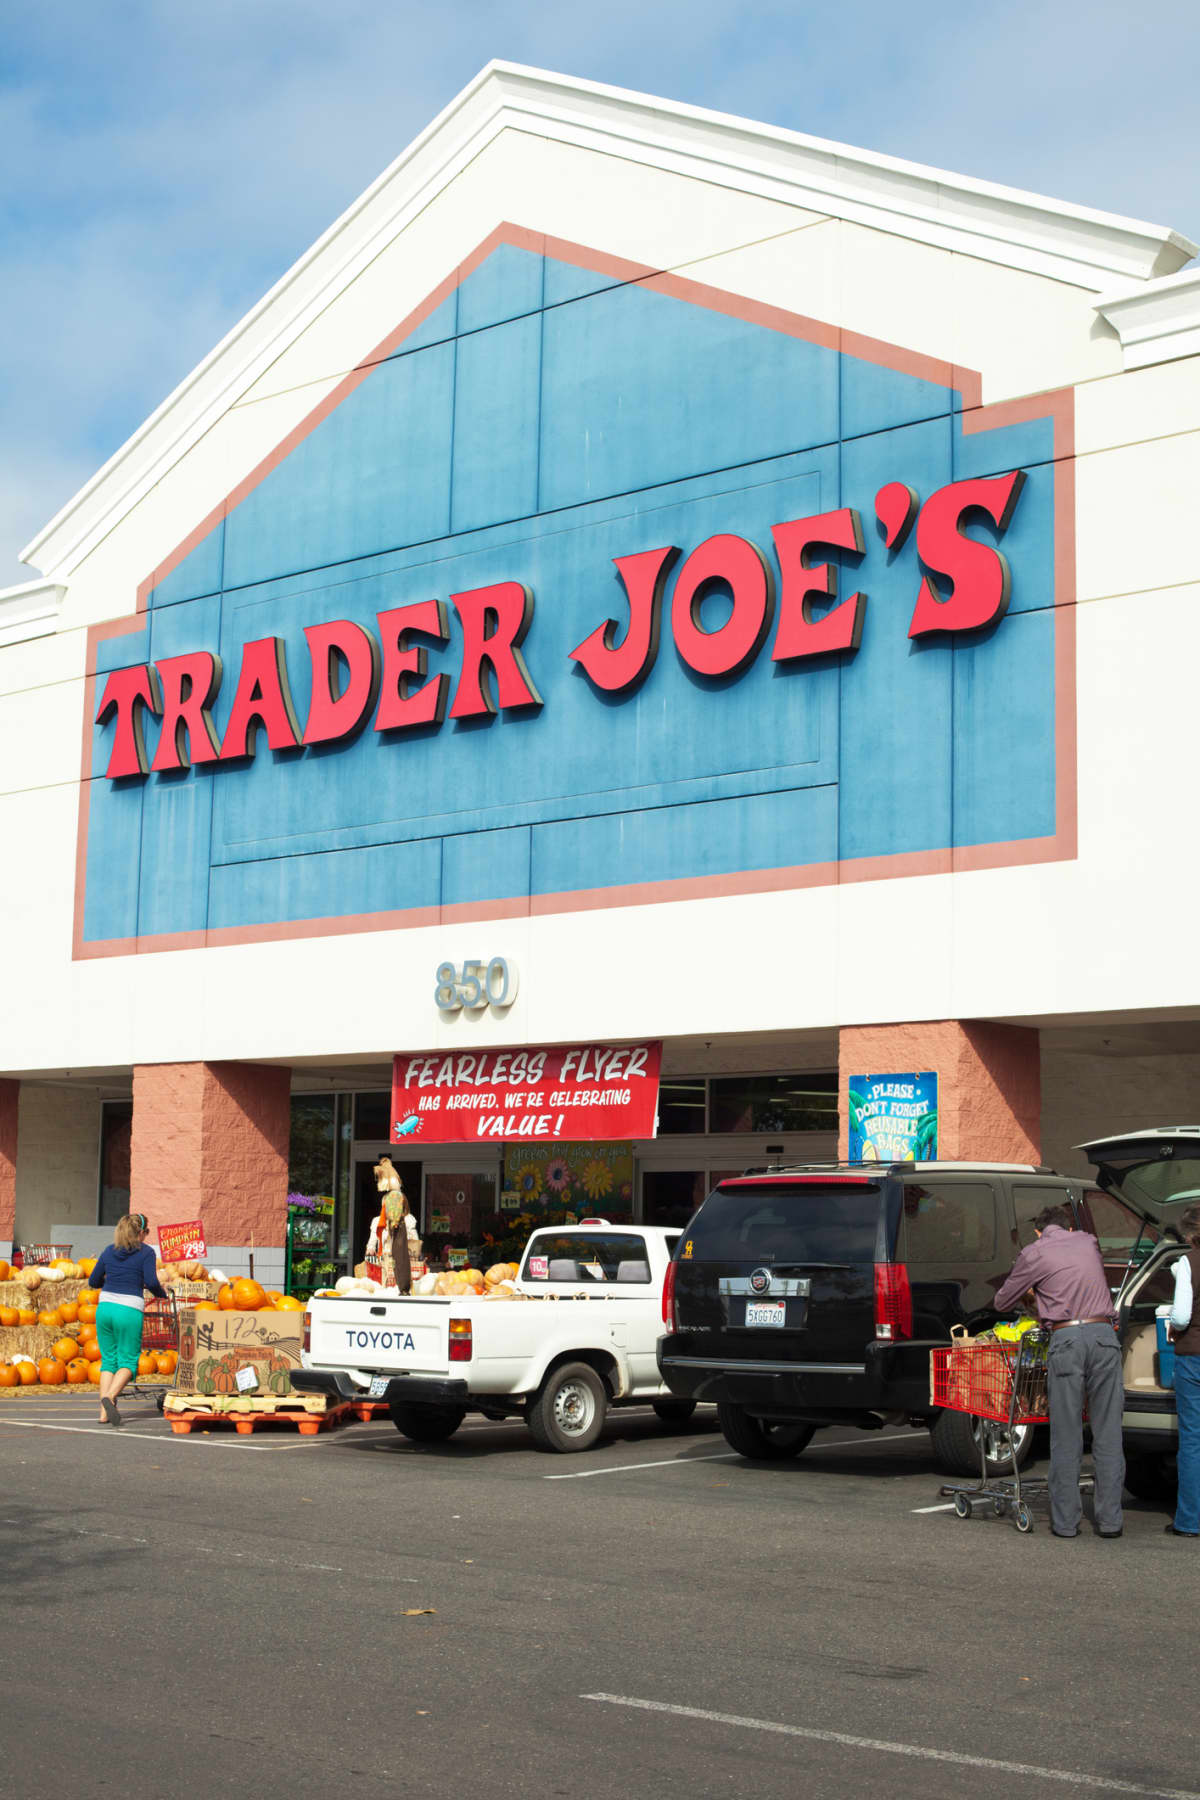 Folsom, California, USA - October 19, 2011: Storefront view of a Trader Joe's grocery store with parked cars and shoppers going in and out.  Trader Joe's is a privately held chain of specialty grocery stores .The first Trader Joe's store opened in Pasadena, California in 1967 and today there are over 360 stores in 29 states.